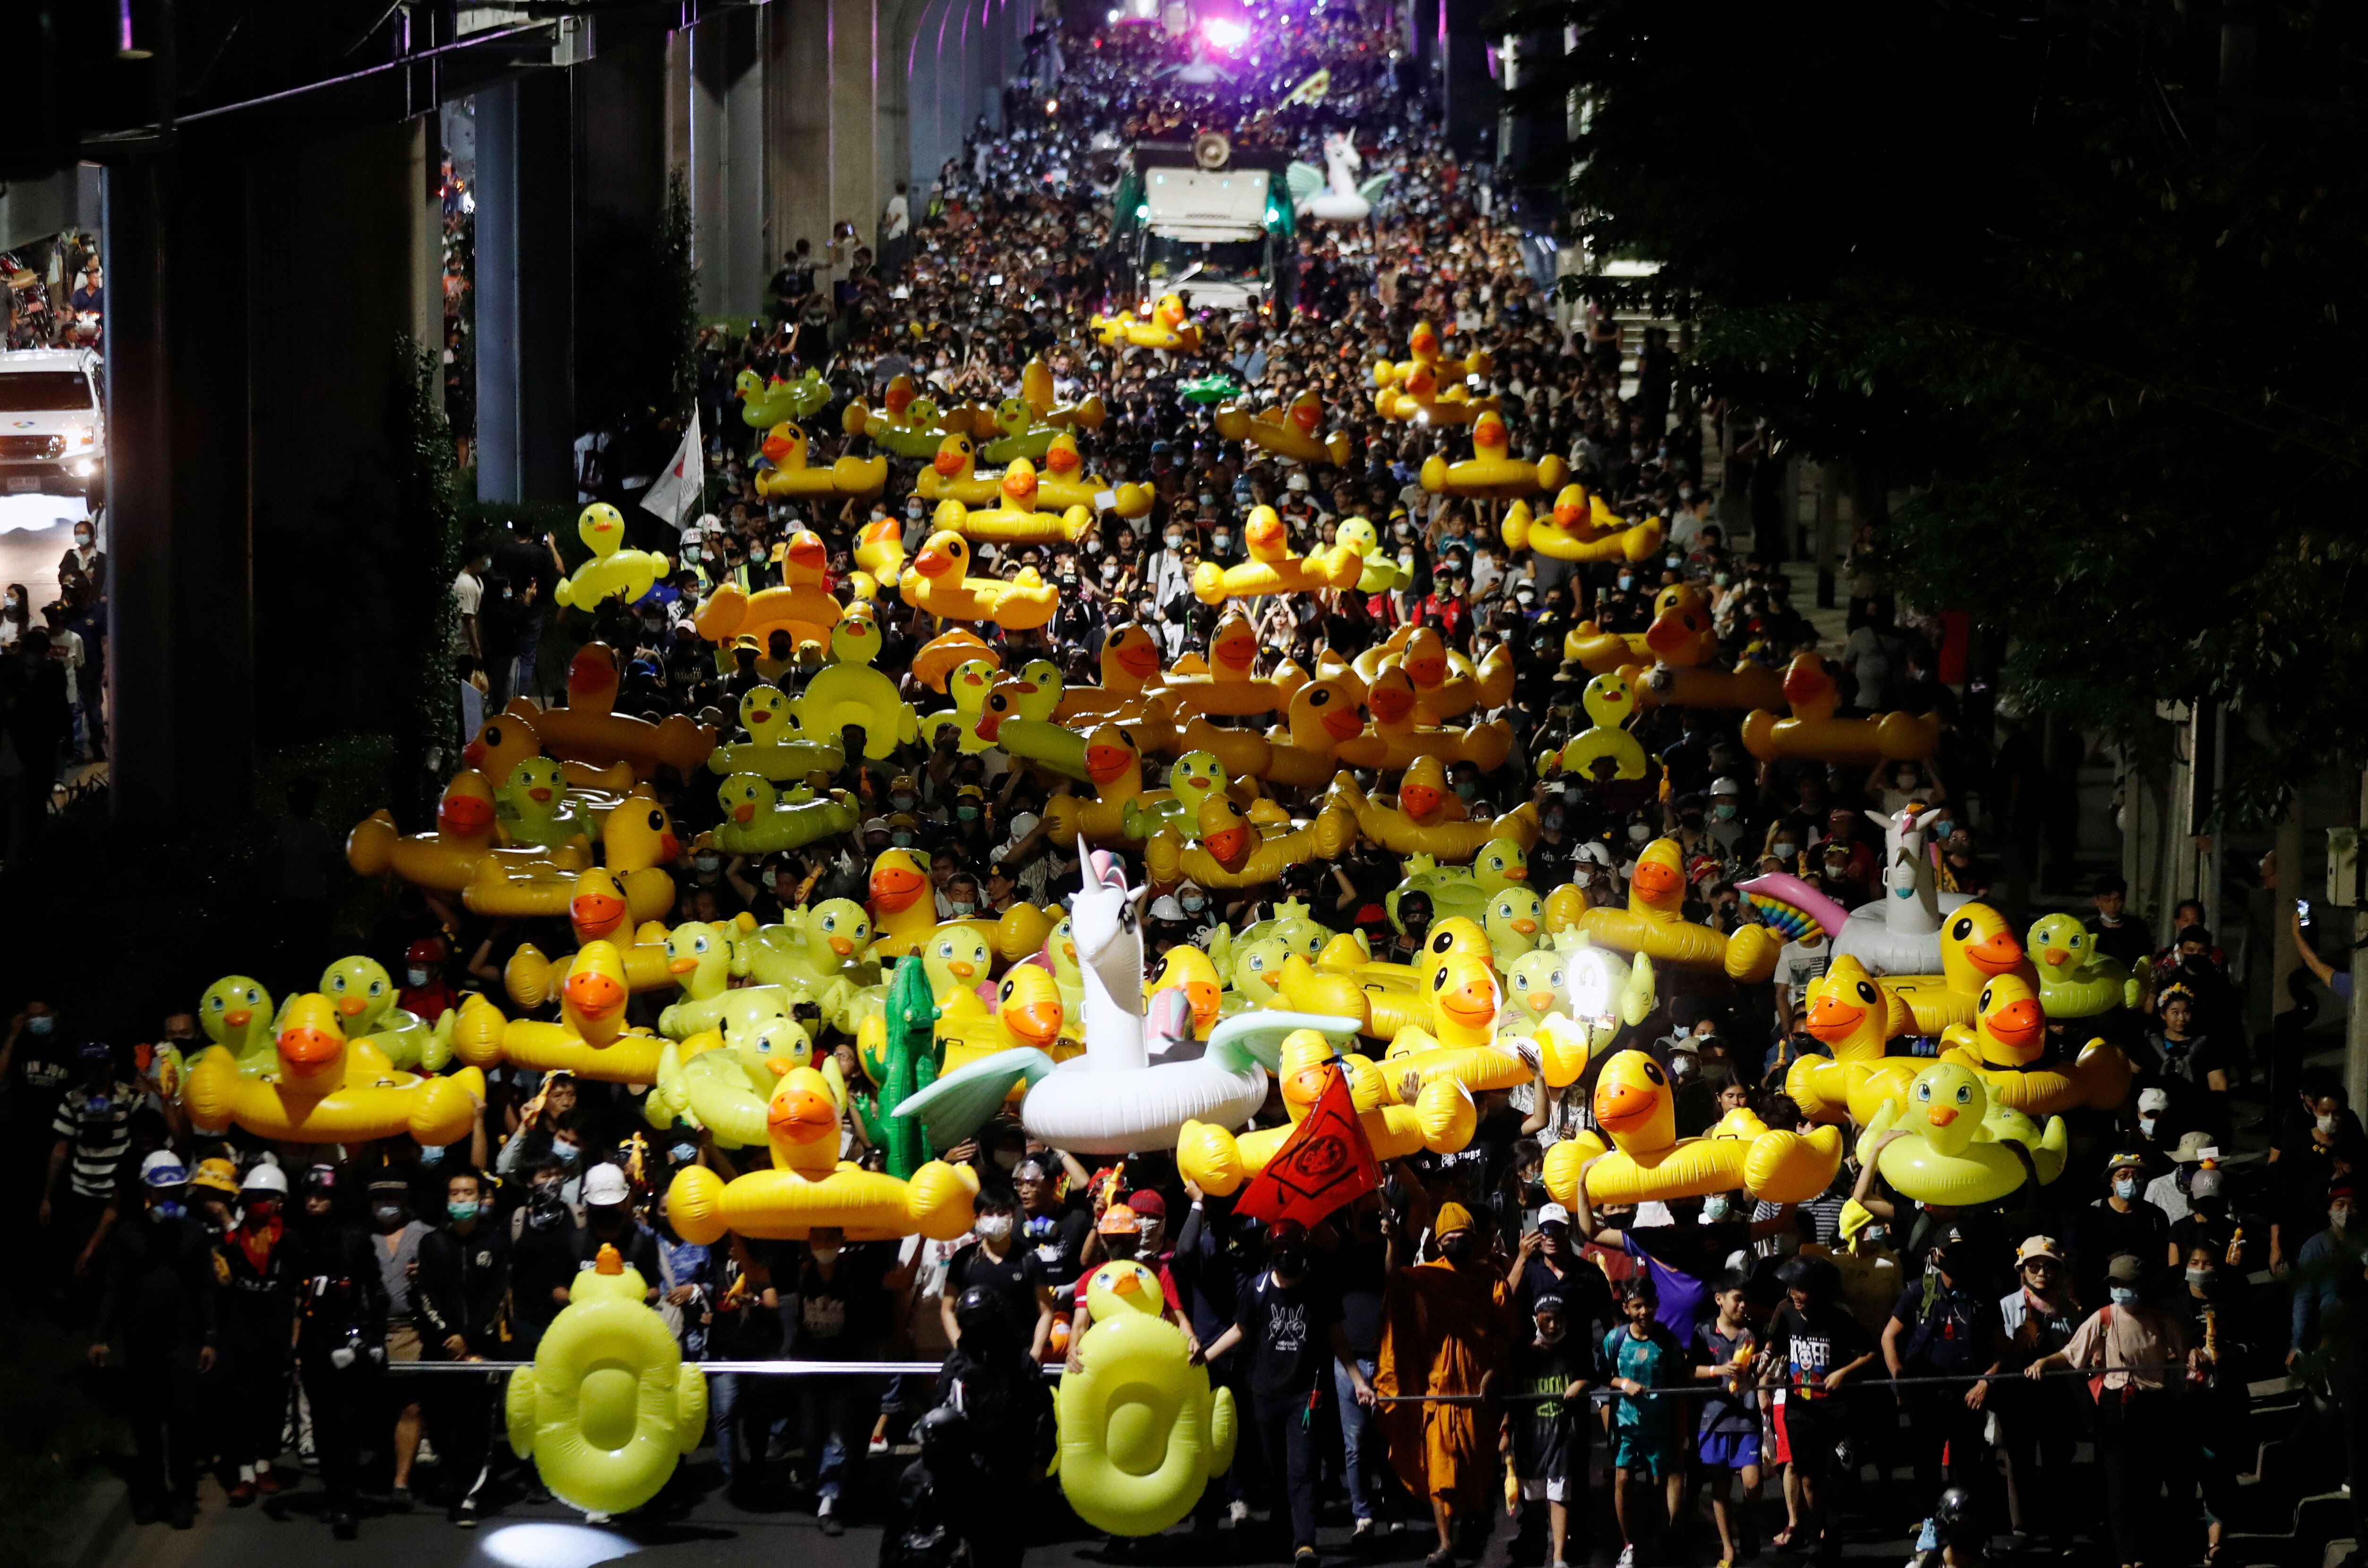 Protesters carry inflatable yellow ducks, which have become good-humored symbols of resistance during anti-government rallies